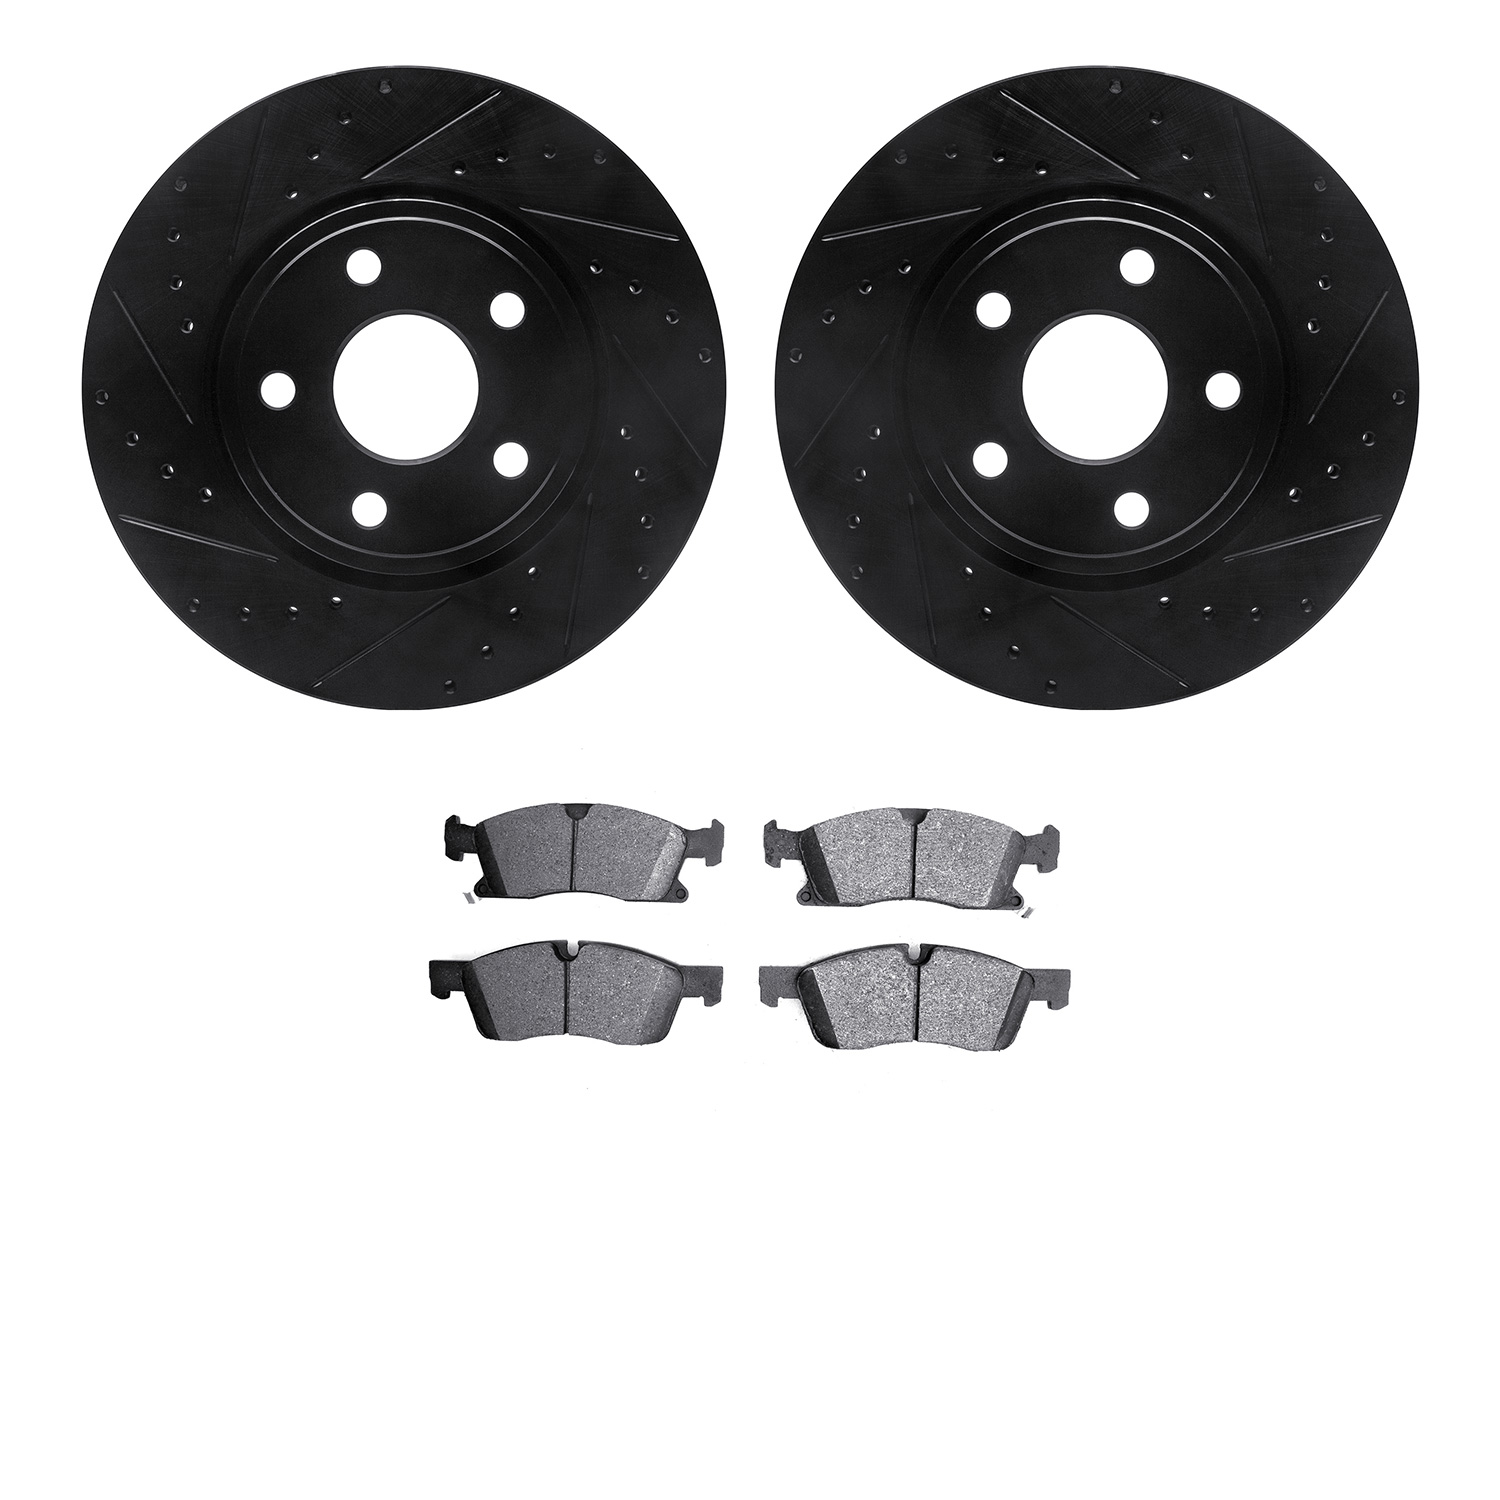 8402-42006 Drilled/Slotted Brake Rotors with Ultimate-Duty Brake Pads Kit [Black], Fits Select Mopar, Position: Front